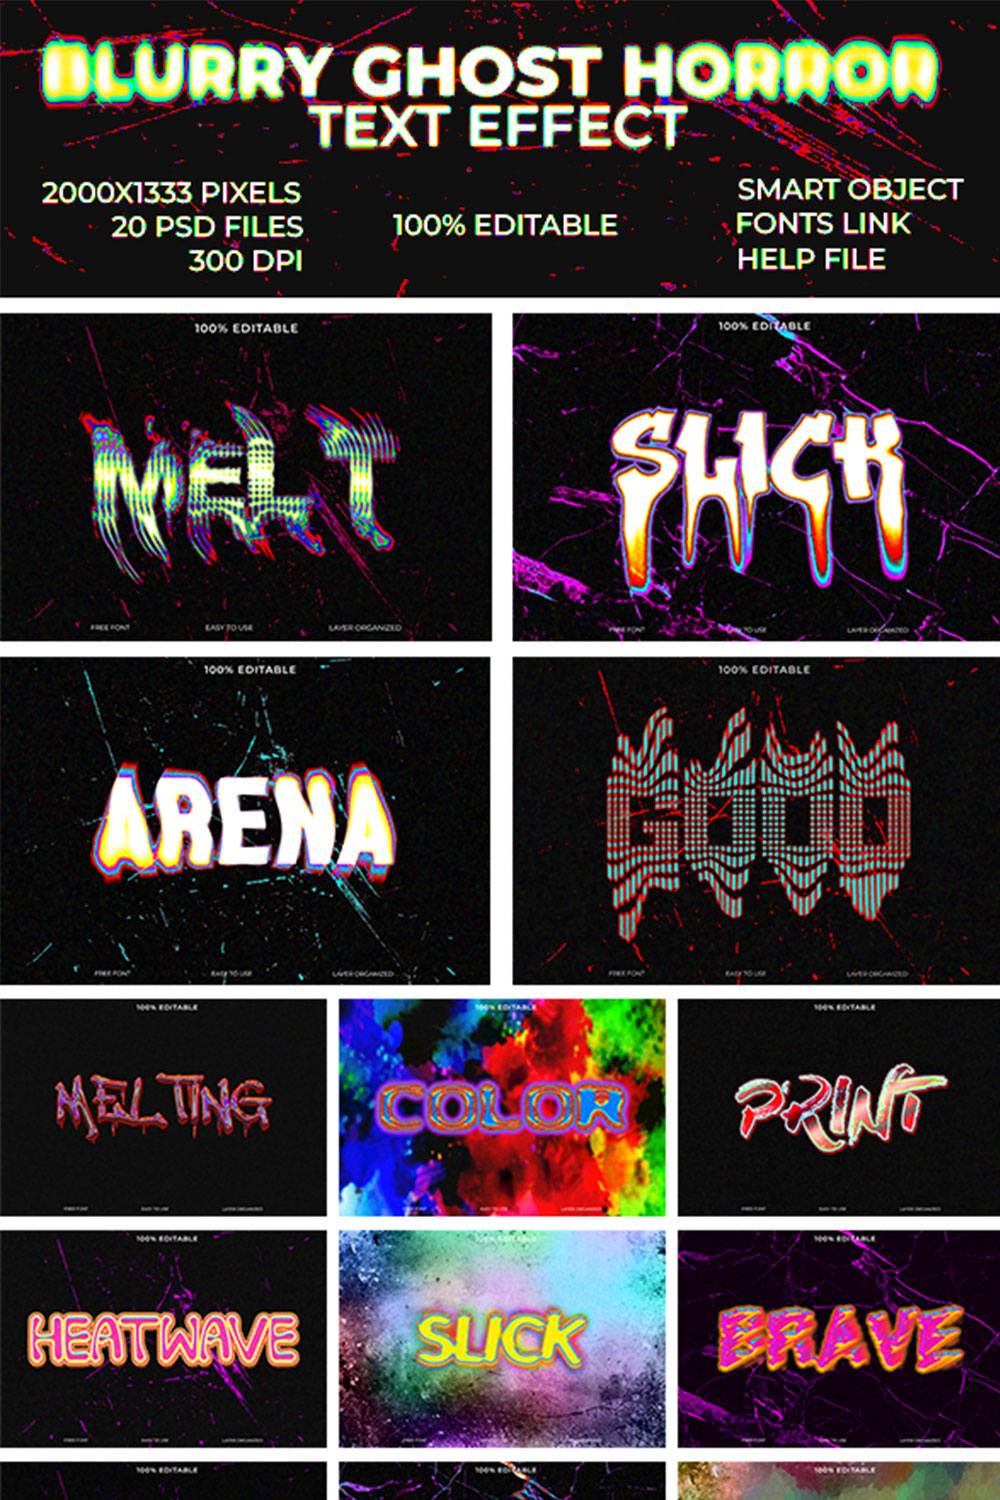 Blurry Ghost Horror Glow Text Effects pinterest preview image.